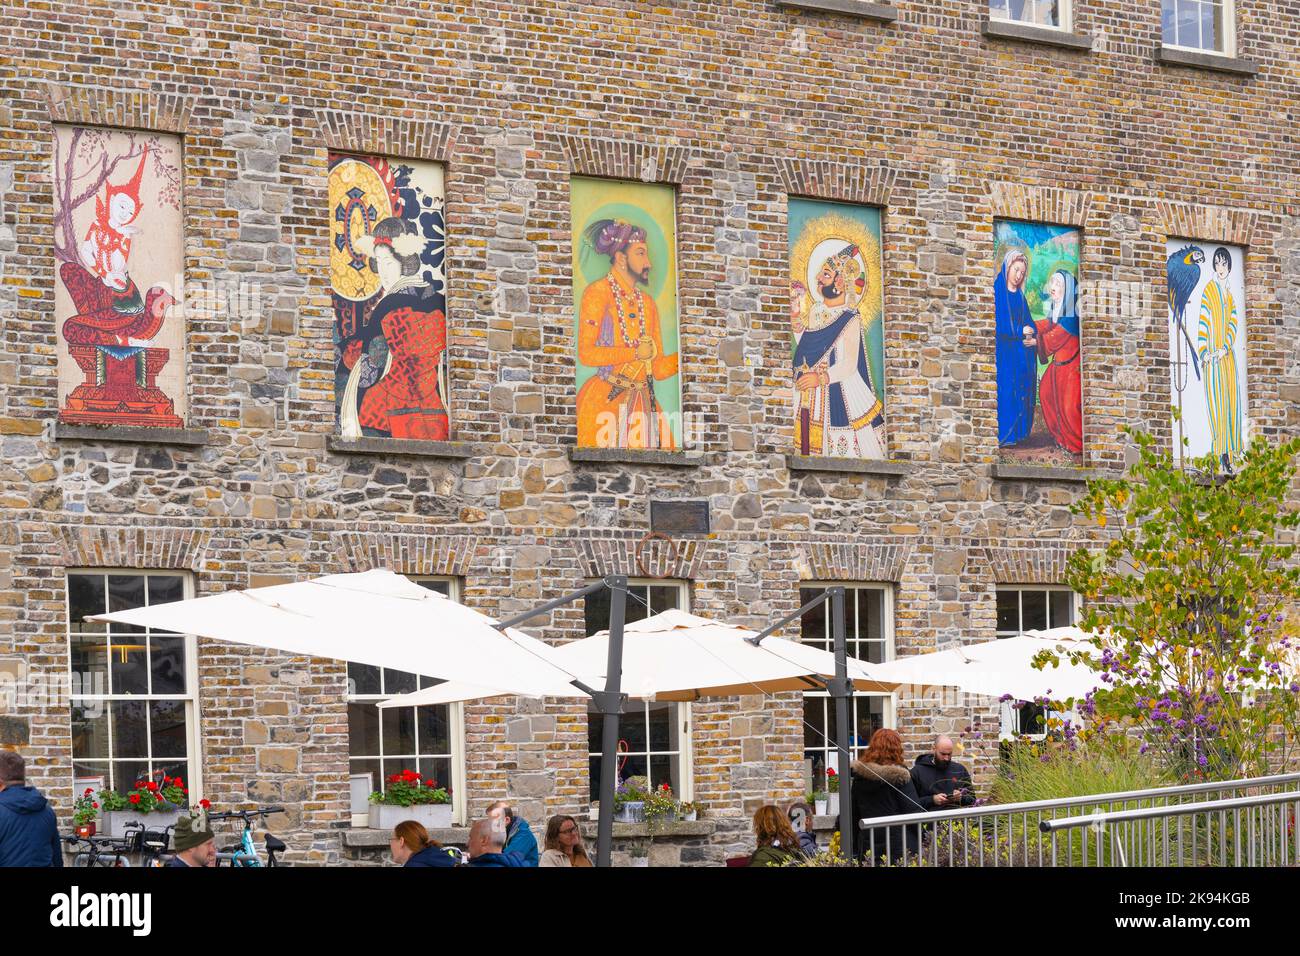 Ireland Eire Dublin Dame Street Dublin Castle mostly 18th century origins Norman 1230 The Dubhlinn Gardens Chester Beatty Gallery pictures cafe Stock Photo